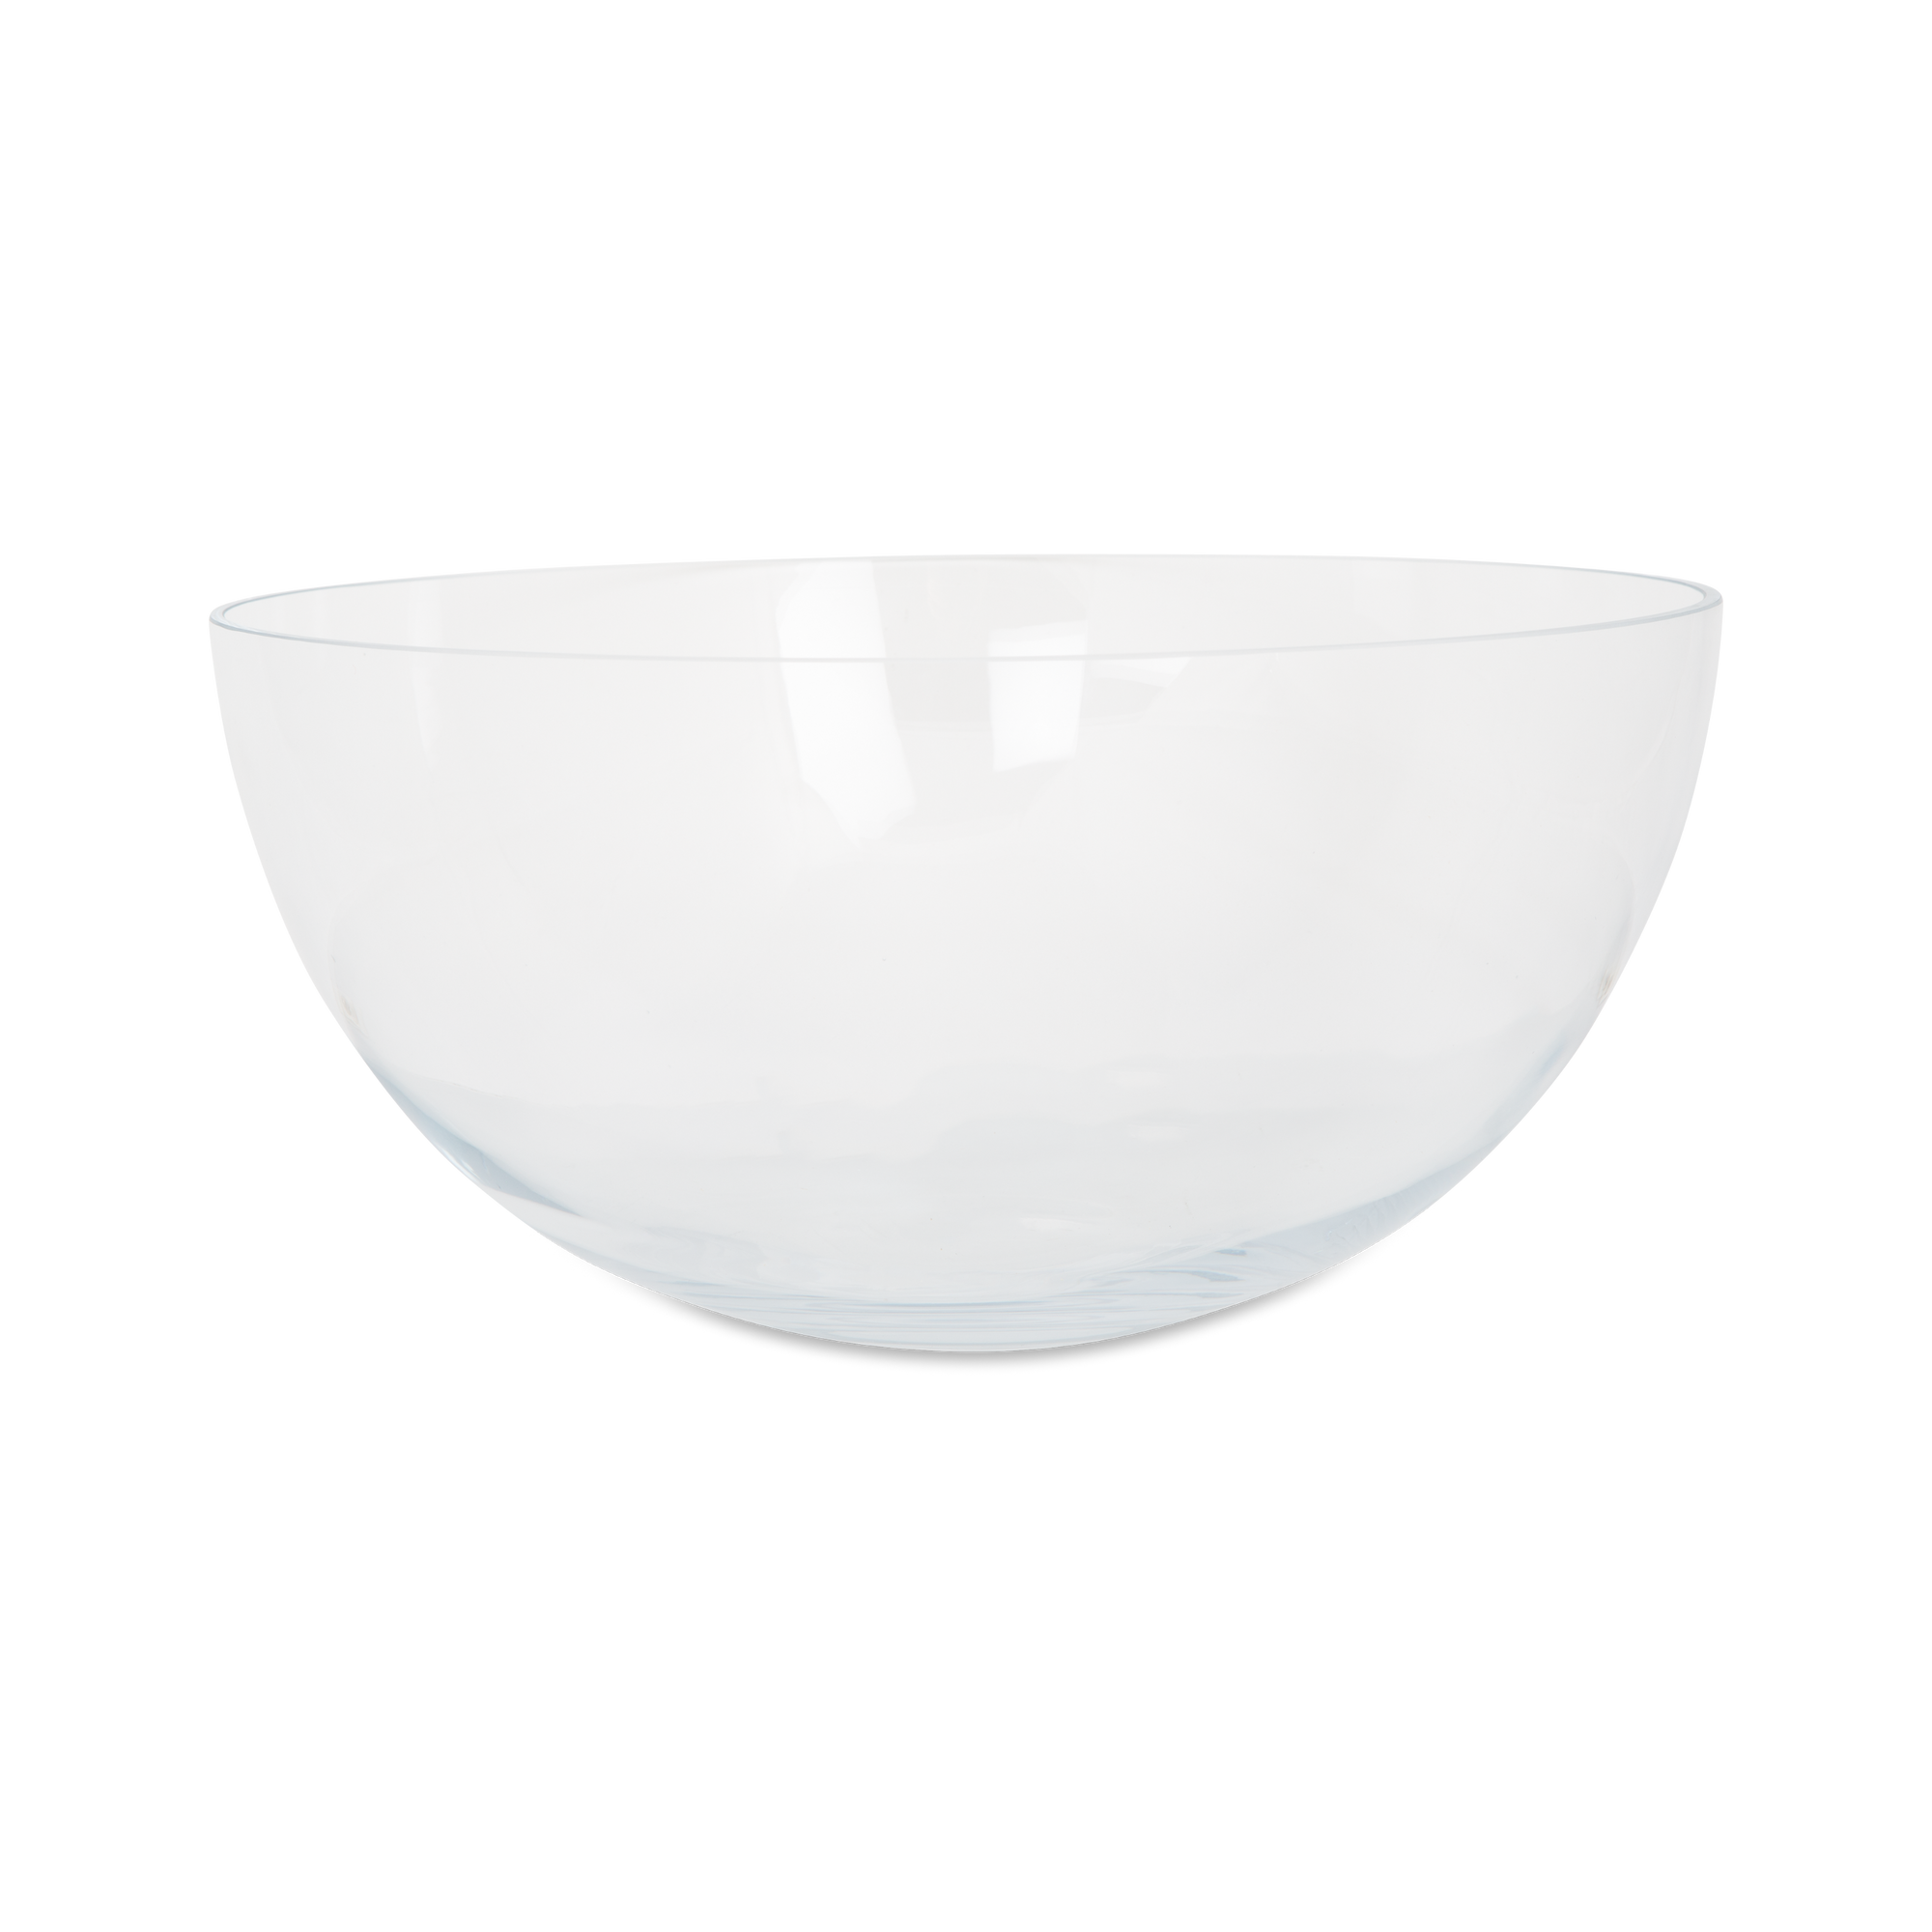 A simple, decorative, crystal-clear glass bowl in a clean, classic shape.